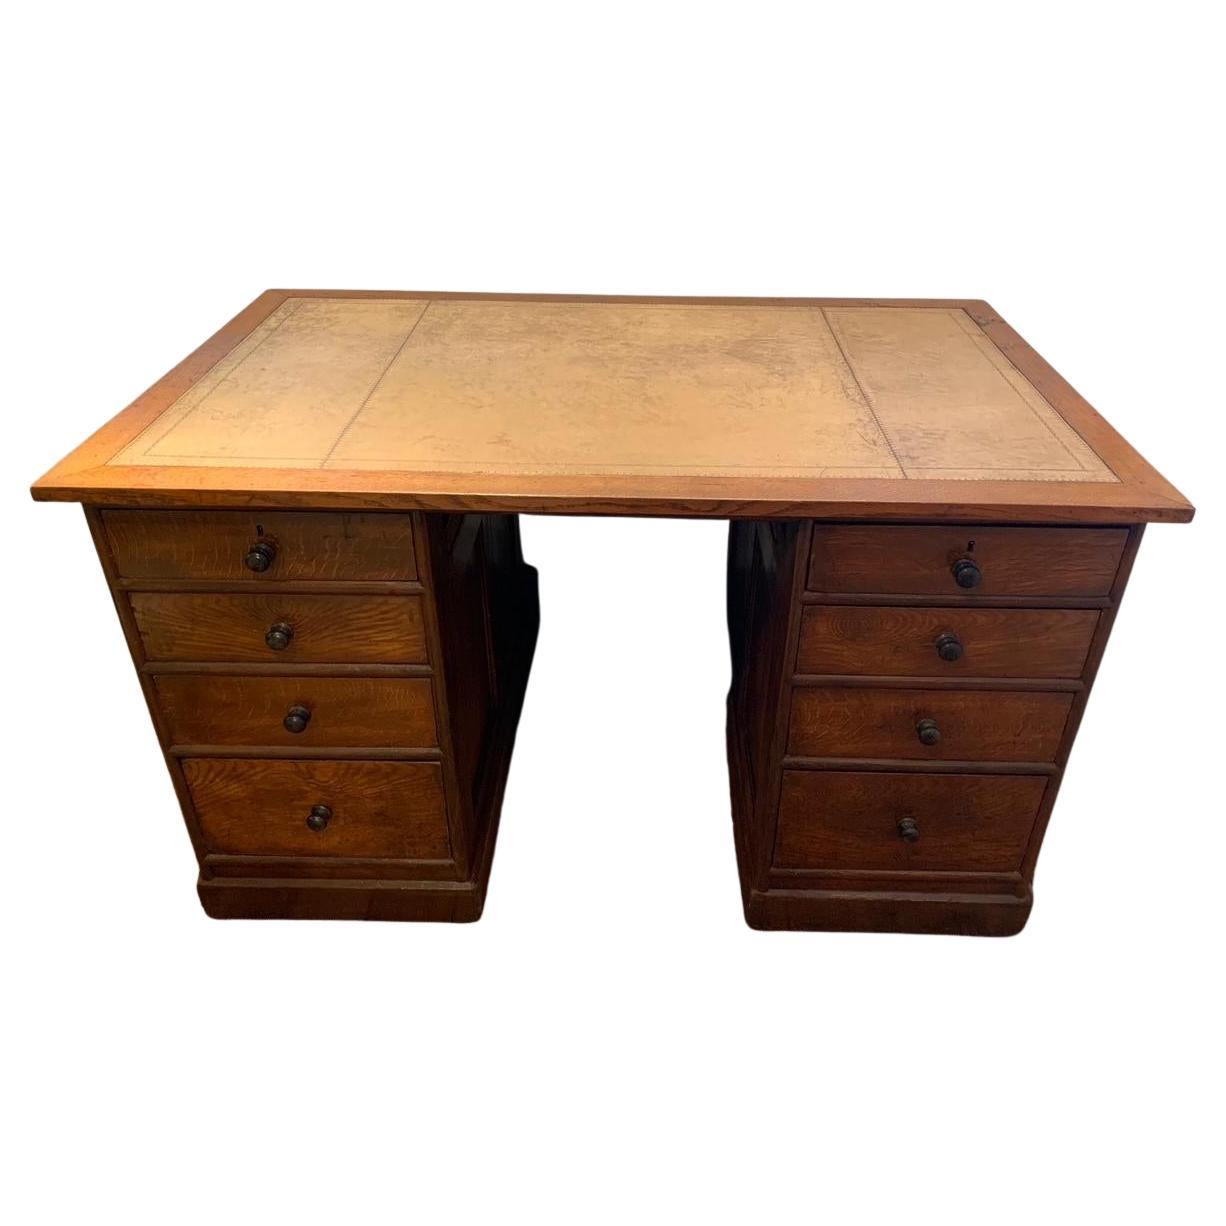 19th Century English Double Pedestal Desk With Tan Leather Top